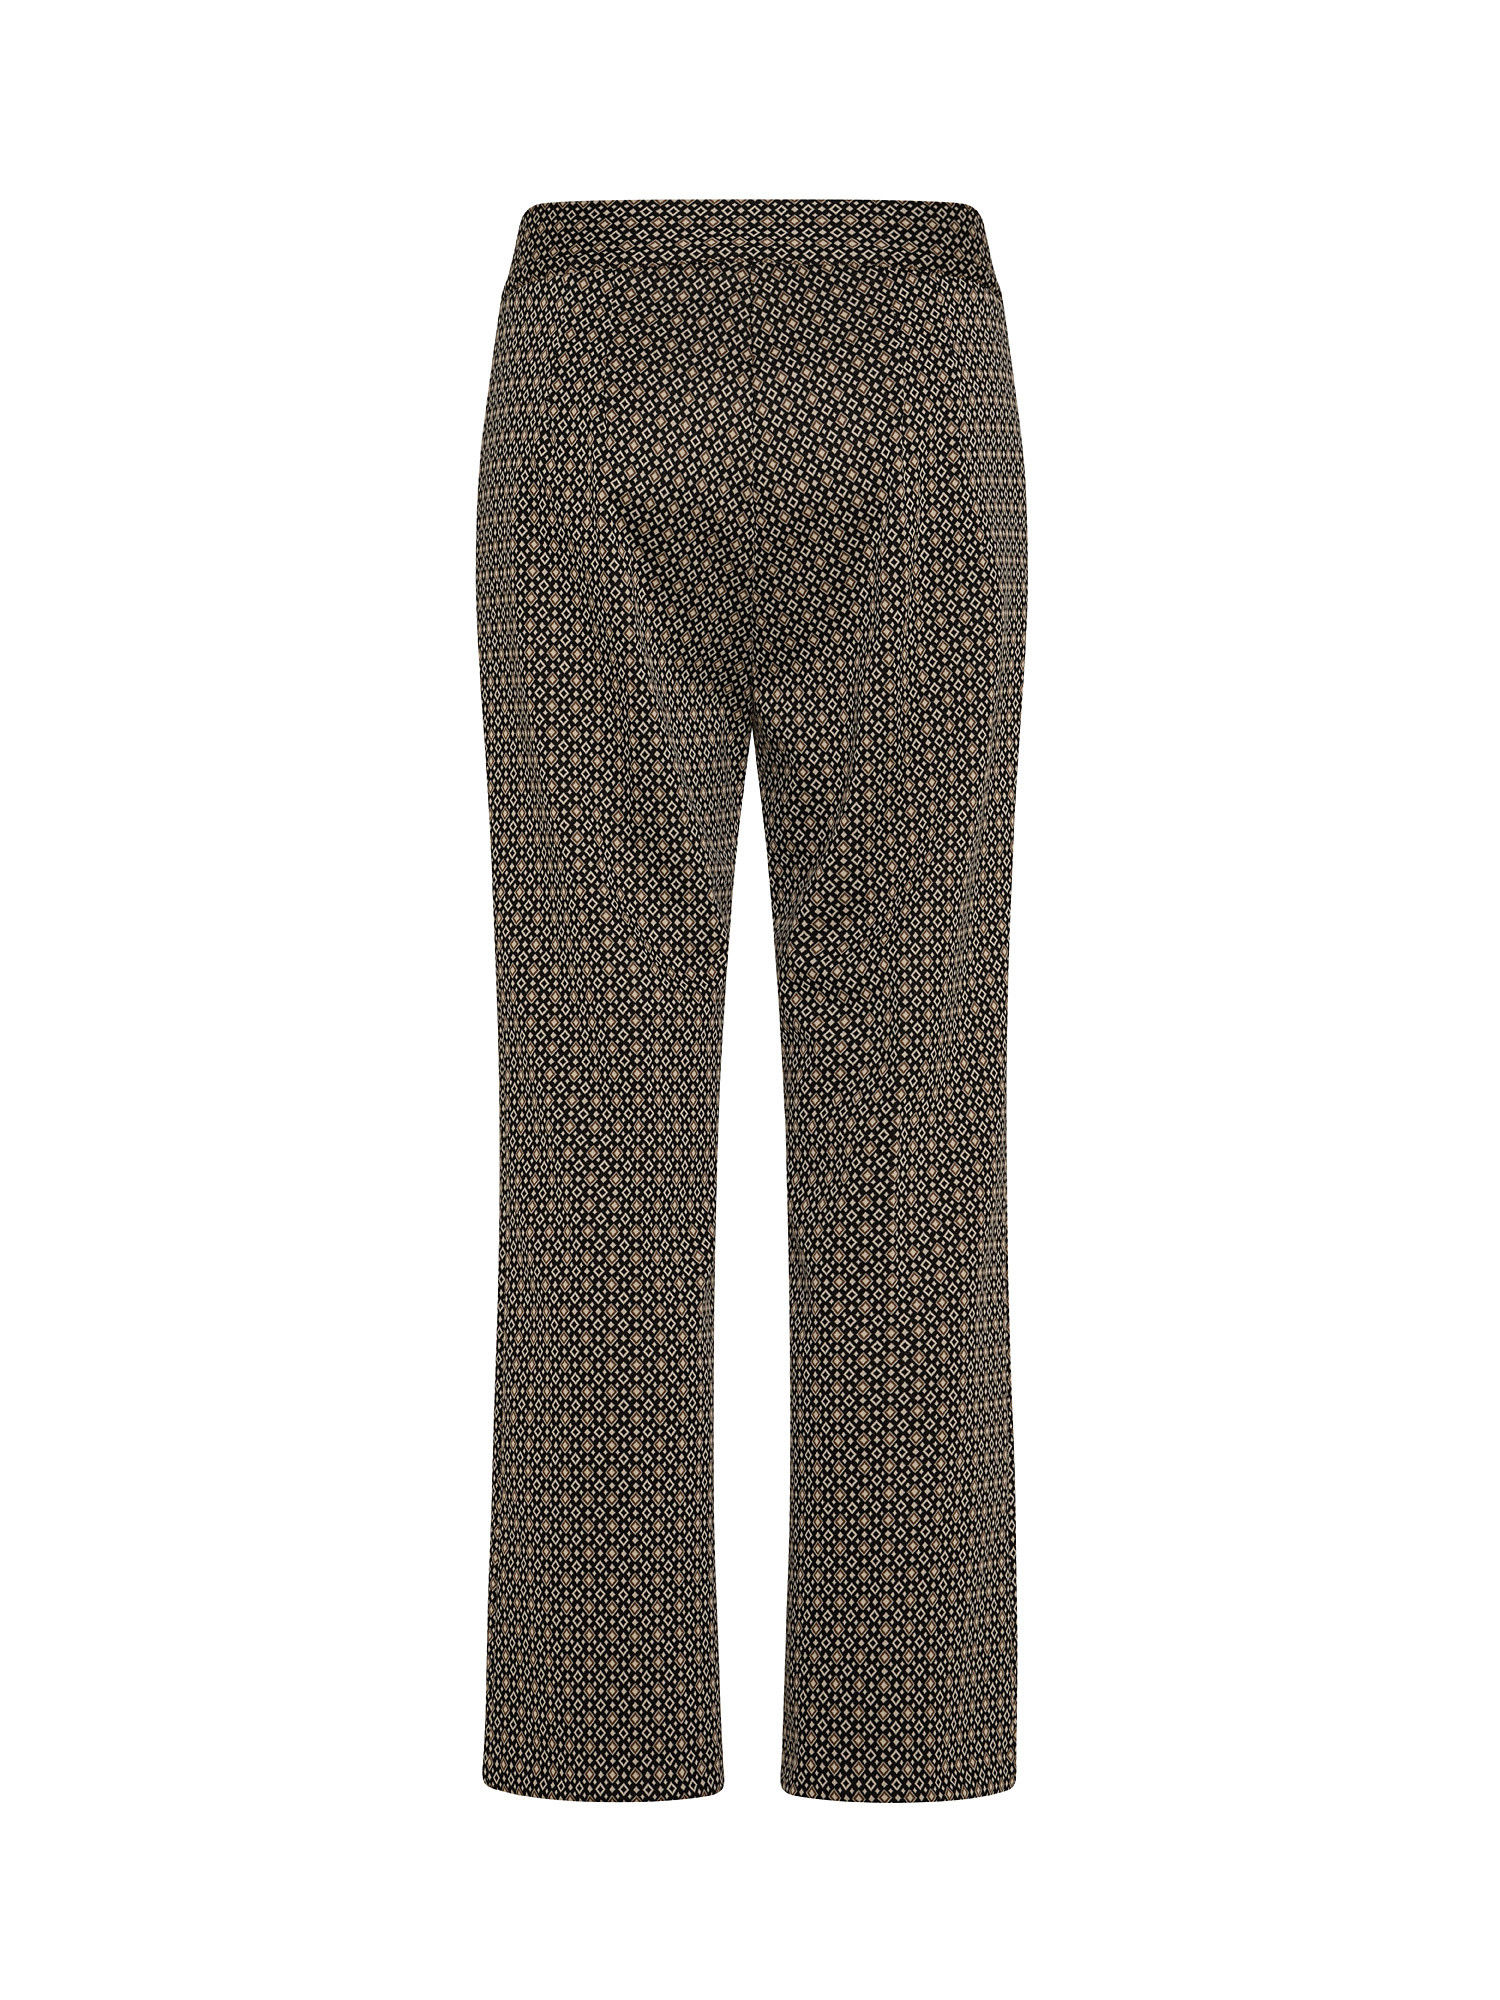 Trousers with pattern, Grey, large image number 1